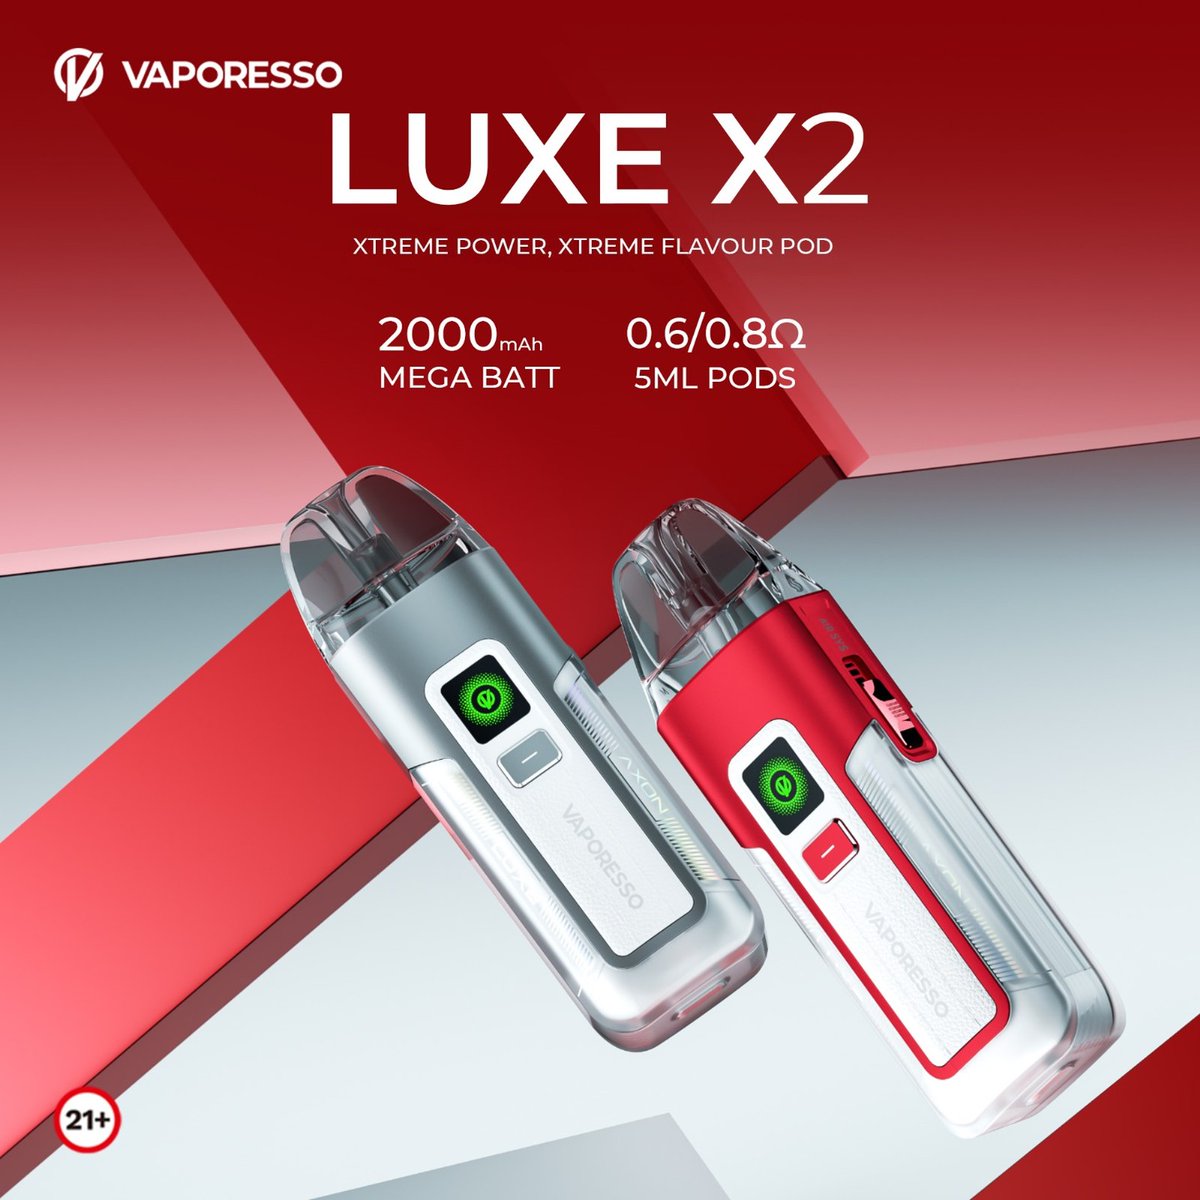 Vaporesso LUXE X2 Kit 😍Xplosive Flavor 🔥Xceeded Endurance ⚠ Warning: The device is used with e-liquid which contains addictive chemical nicotine. For Adult use only. #sourcemore #sourcemoreofficial #Vaporesso #LUXEX2 #vapetricks #instavape #vapecommunity #vaping